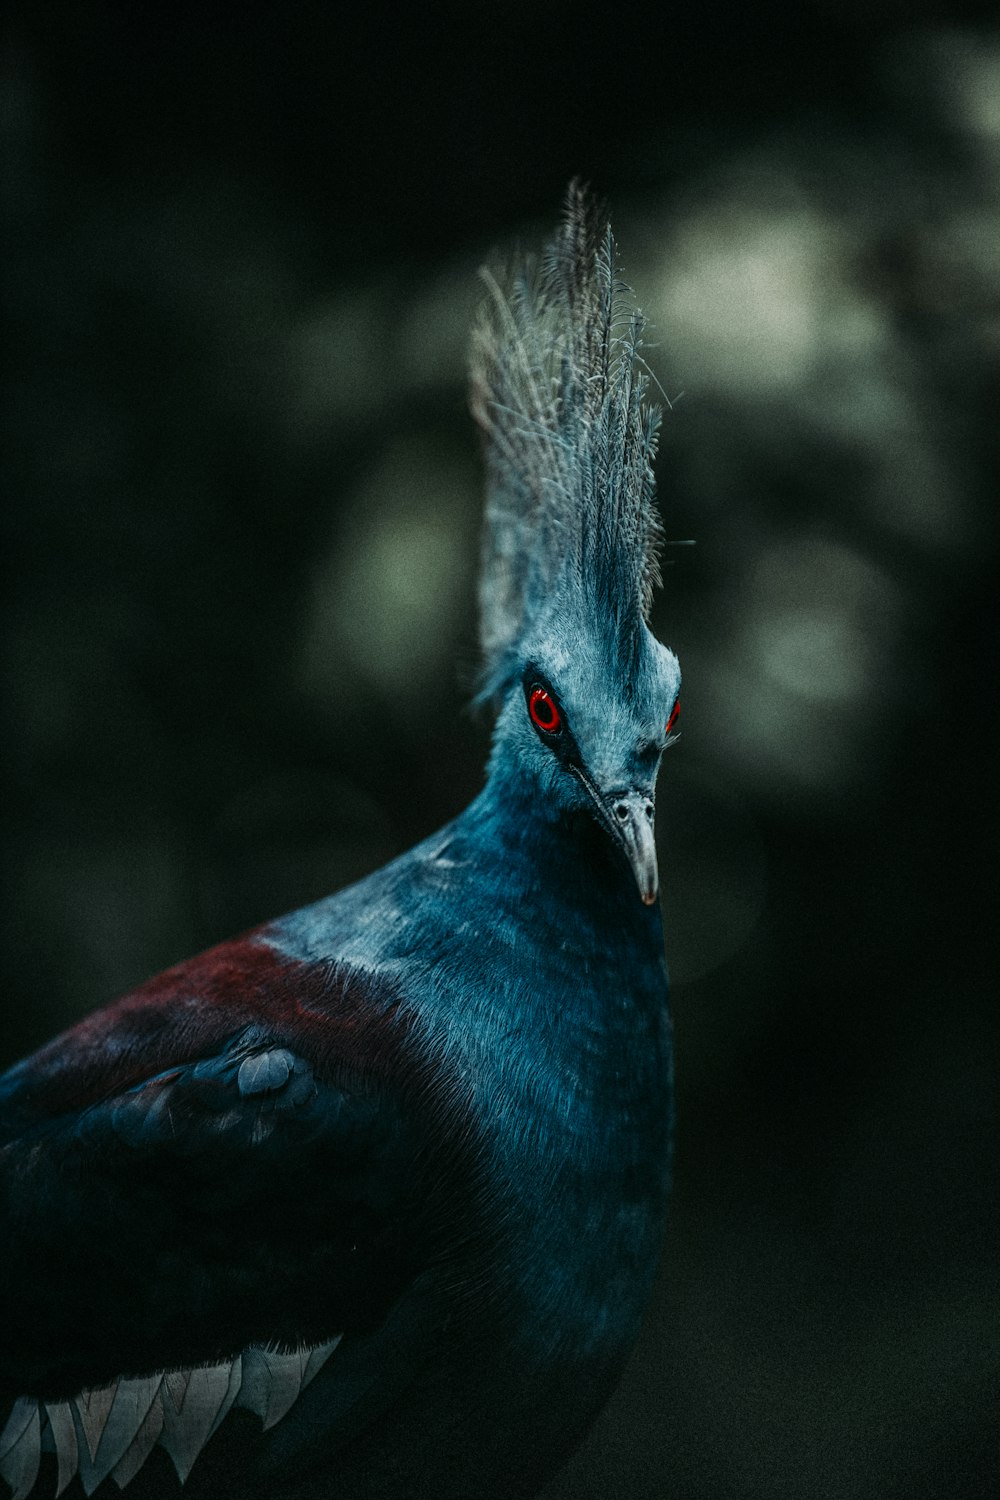 blue and black bird in close up photography